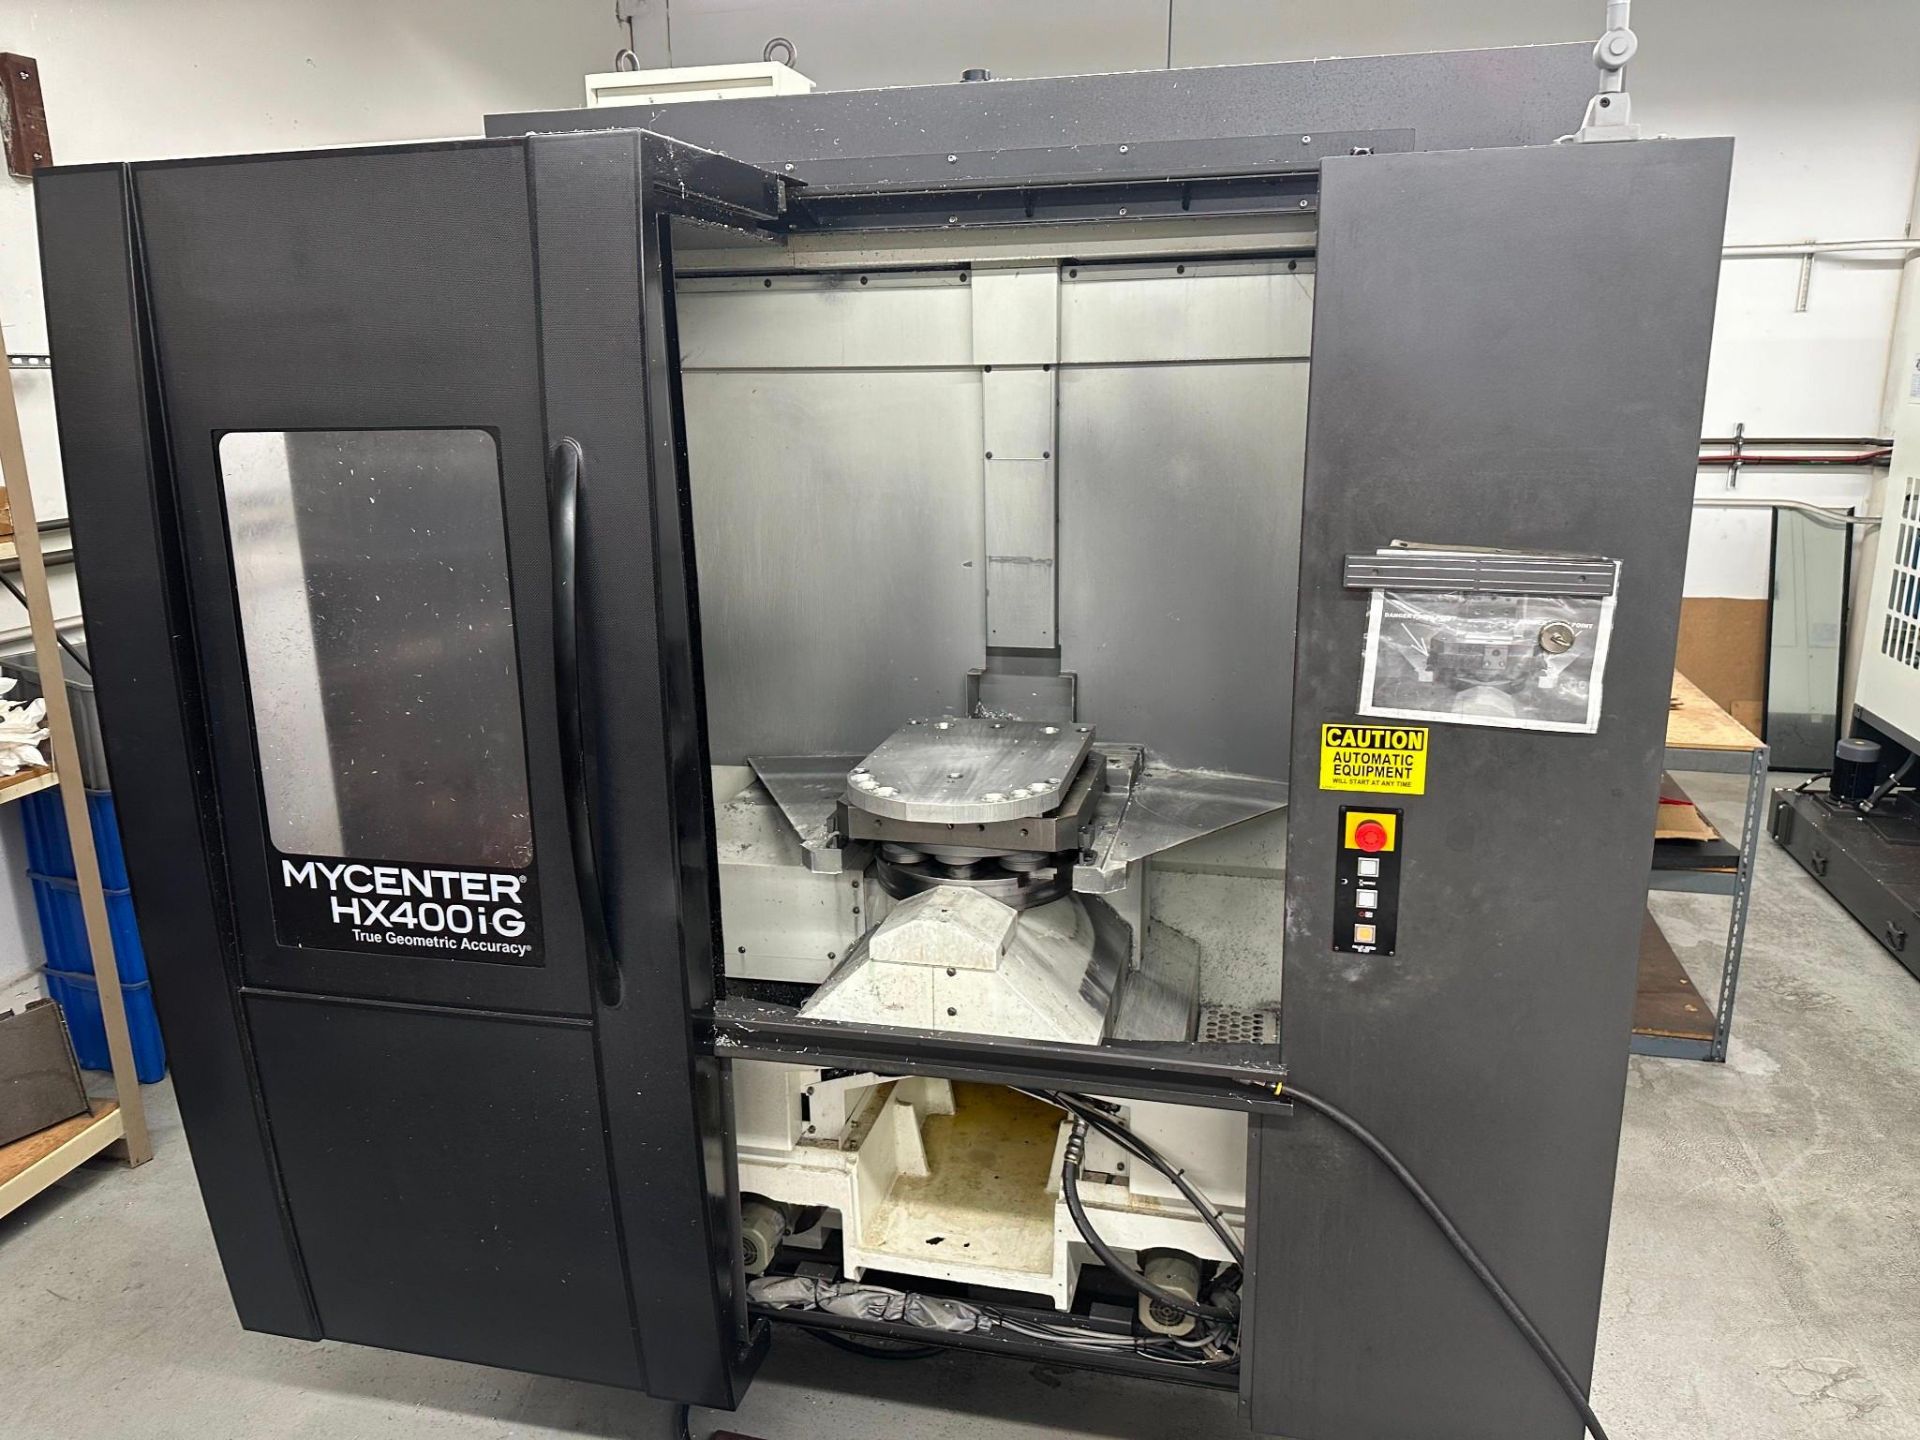 KITAMURA MYCENTER HX400IG HMC, 2018 - FULL 4TH AXIS, CTS, LINEAR SCALES - Image 2 of 17